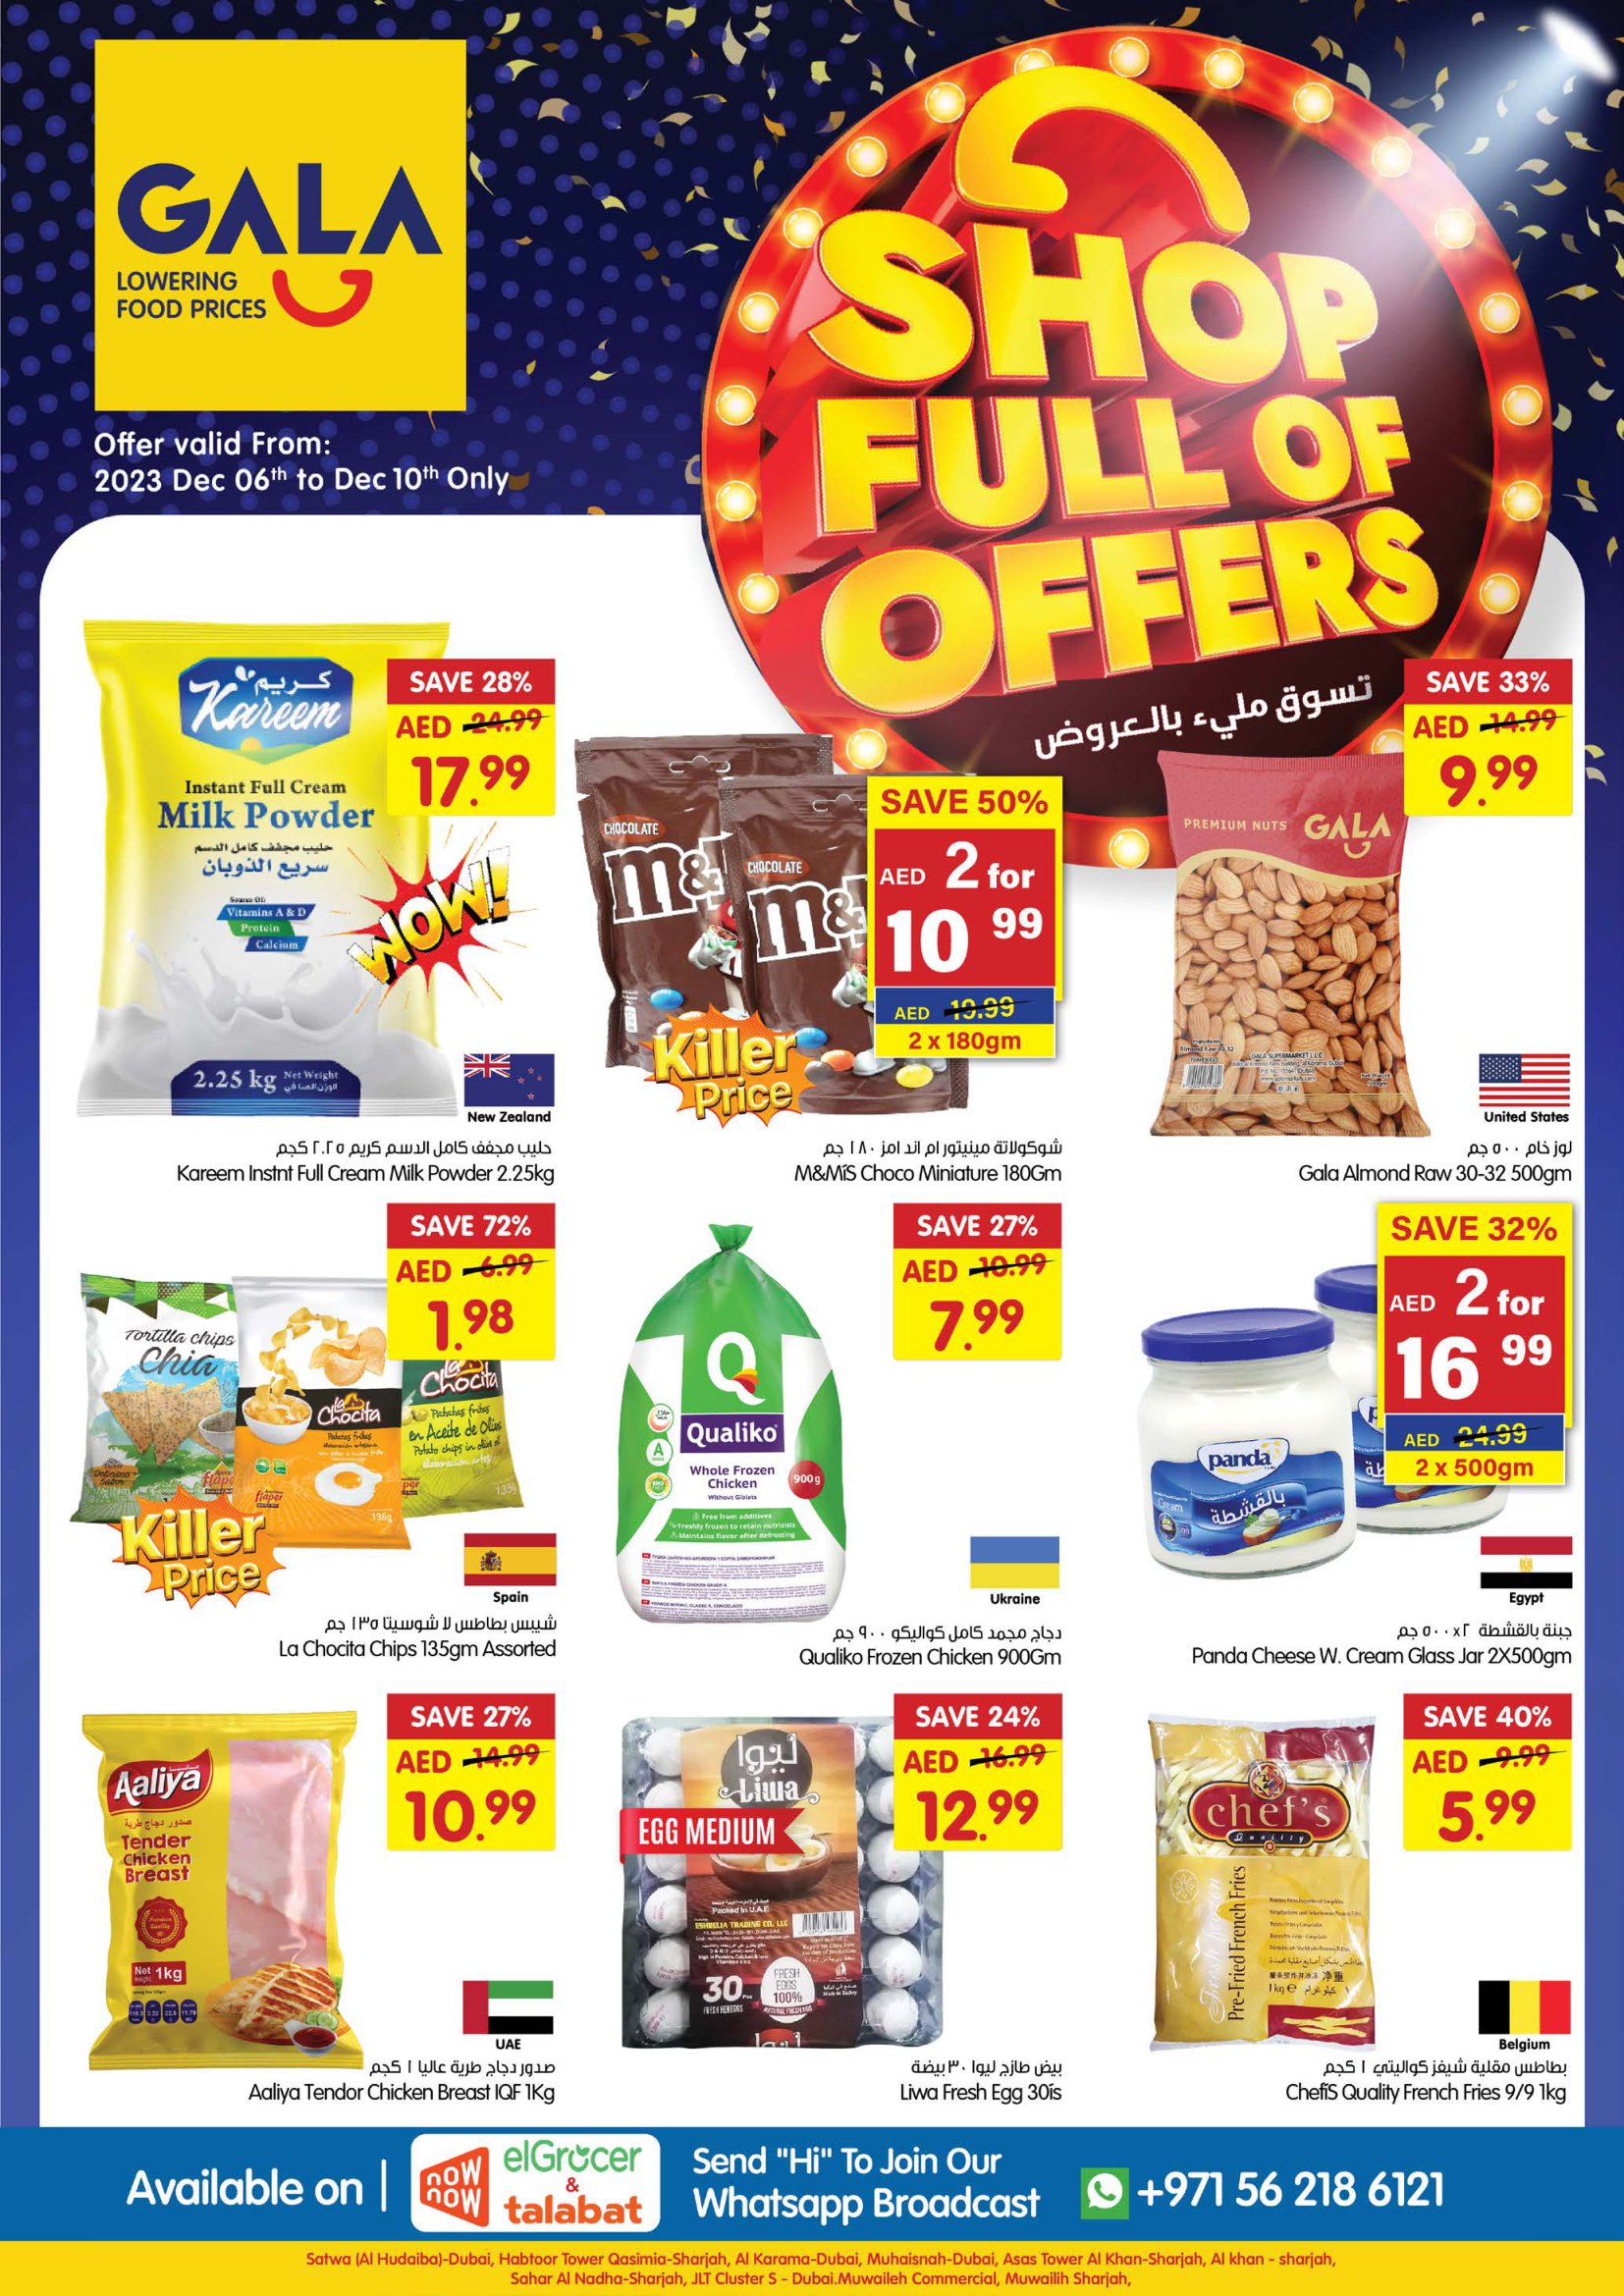 Page 24 at shop full offers Promo at Gala Supermarkets UAE